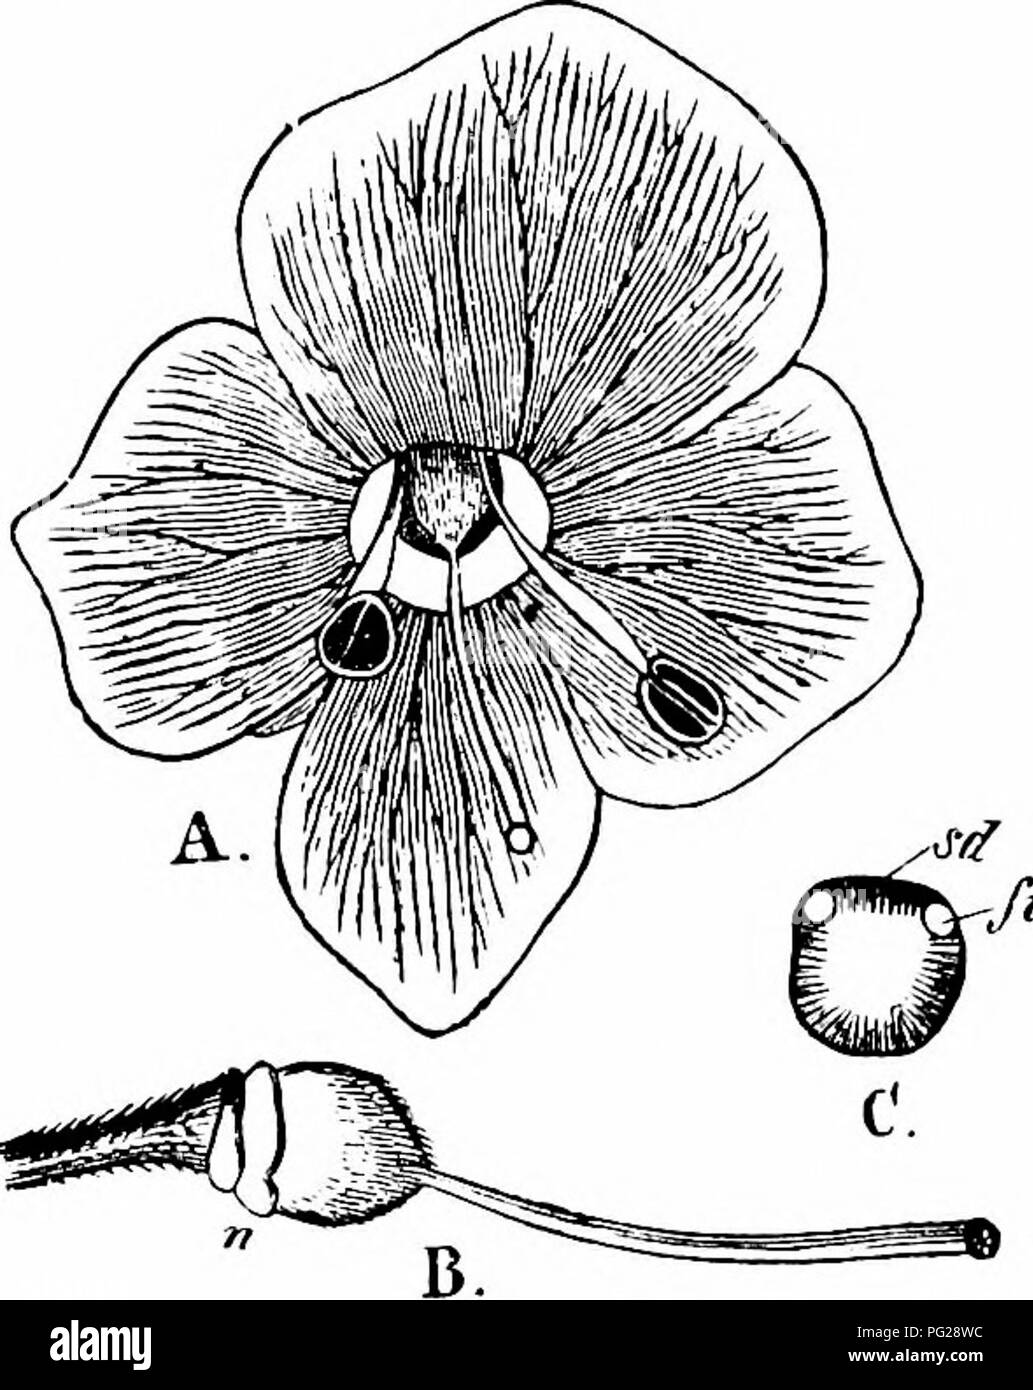 . Handbook of flower pollination : based upon Hermann Mu?ller's work 'The fertilisation of flowers by insects' . Fertilization of plants. 192 ANGIOSPERMAE—DICOTYLEDONES 2120. V. spuria L. (Kerner, 'Nat. Hist. PI.,' Eng. Ed. i, II, p. 326.)—The flowers of this and the most nearly related species (V. longifolia L., and V. spicata L.) are arranged in crowded spikes, and at the beginning of anthesis are adapted by protogyny for cross-pollination. After a few days the stamens of the oldest (i.e. lowest) flowers have elongated so much that their dehiscing anthers occupy the position at first taken u Stock Photo